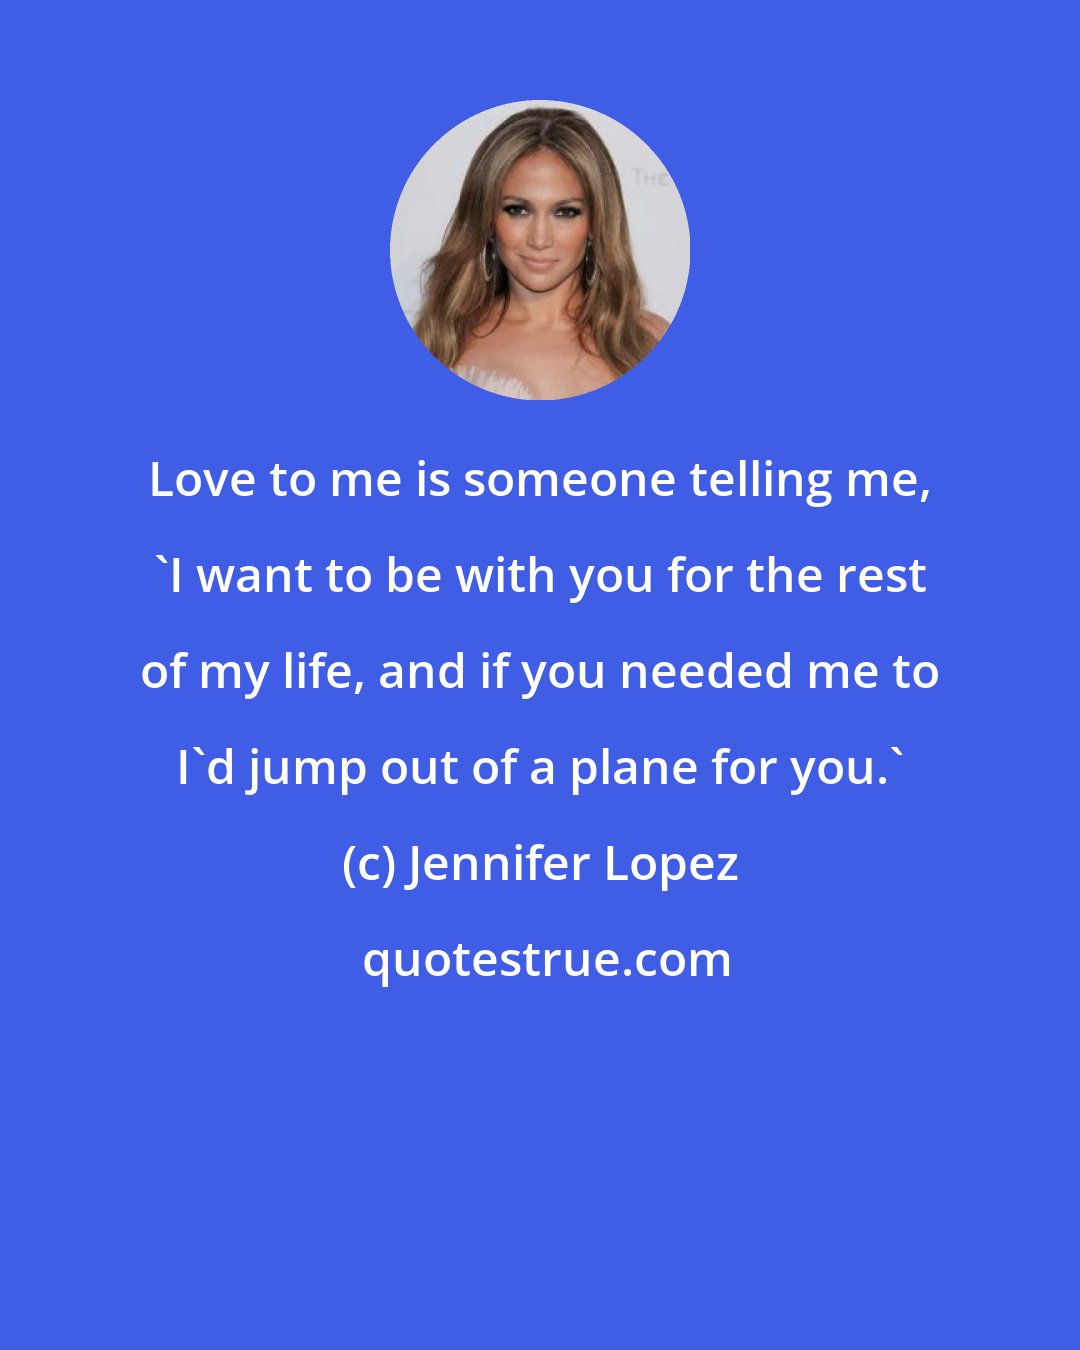 Jennifer Lopez: Love to me is someone telling me, 'I want to be with you for the rest of my life, and if you needed me to I'd jump out of a plane for you.'